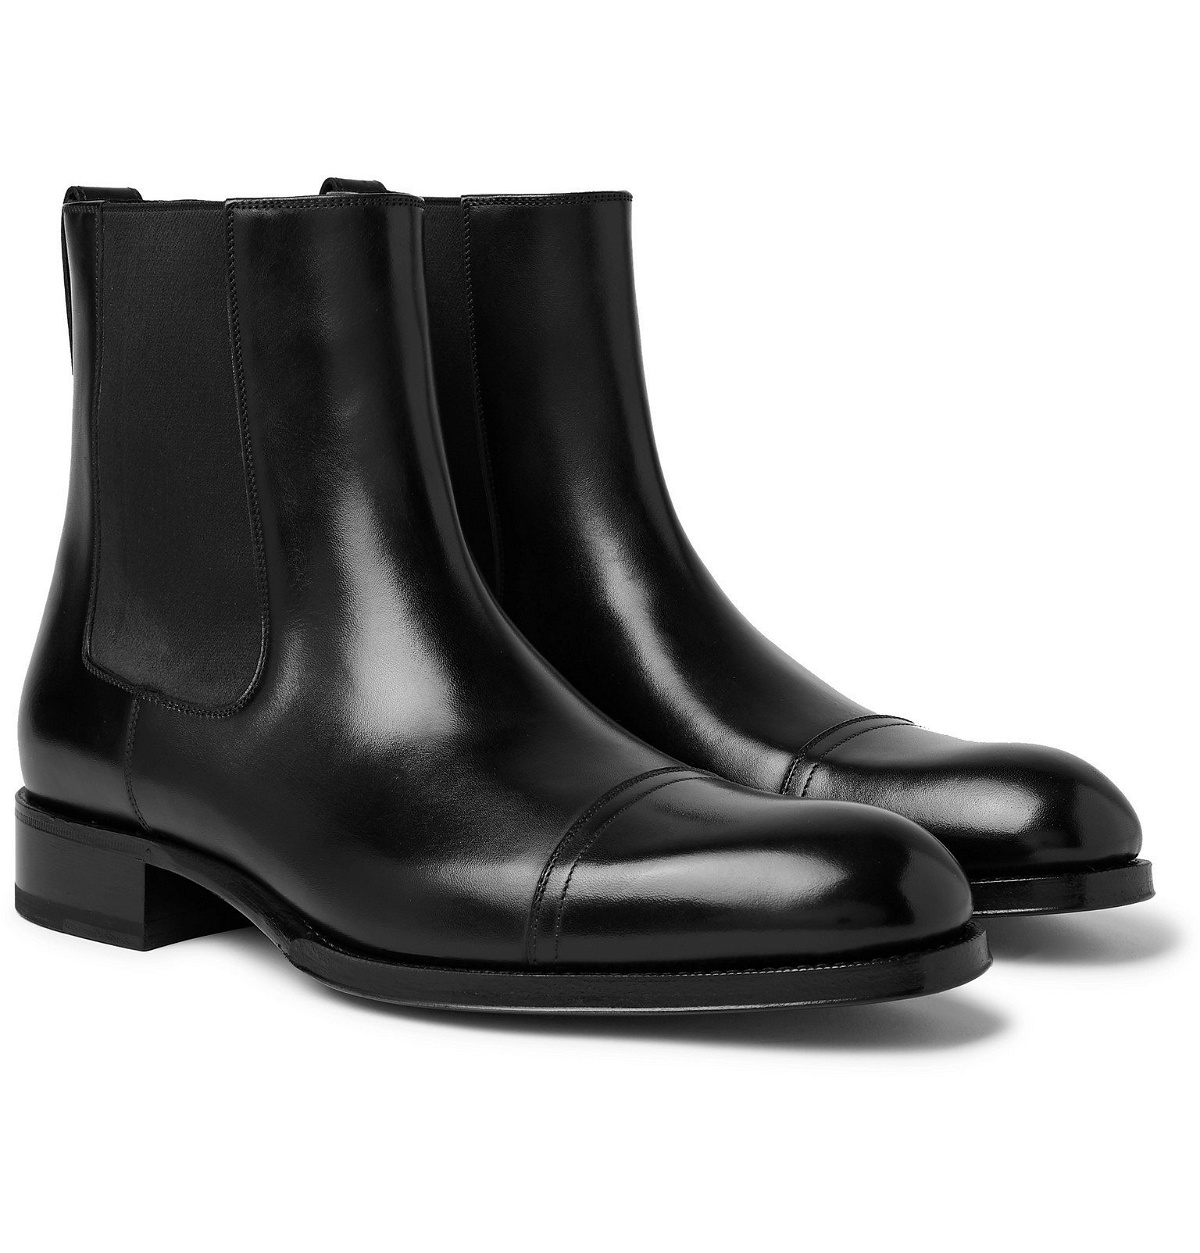 TOM FORD - Edgar Cap-Toe Polished-Leather Chelsea Boots - Black TOM FORD